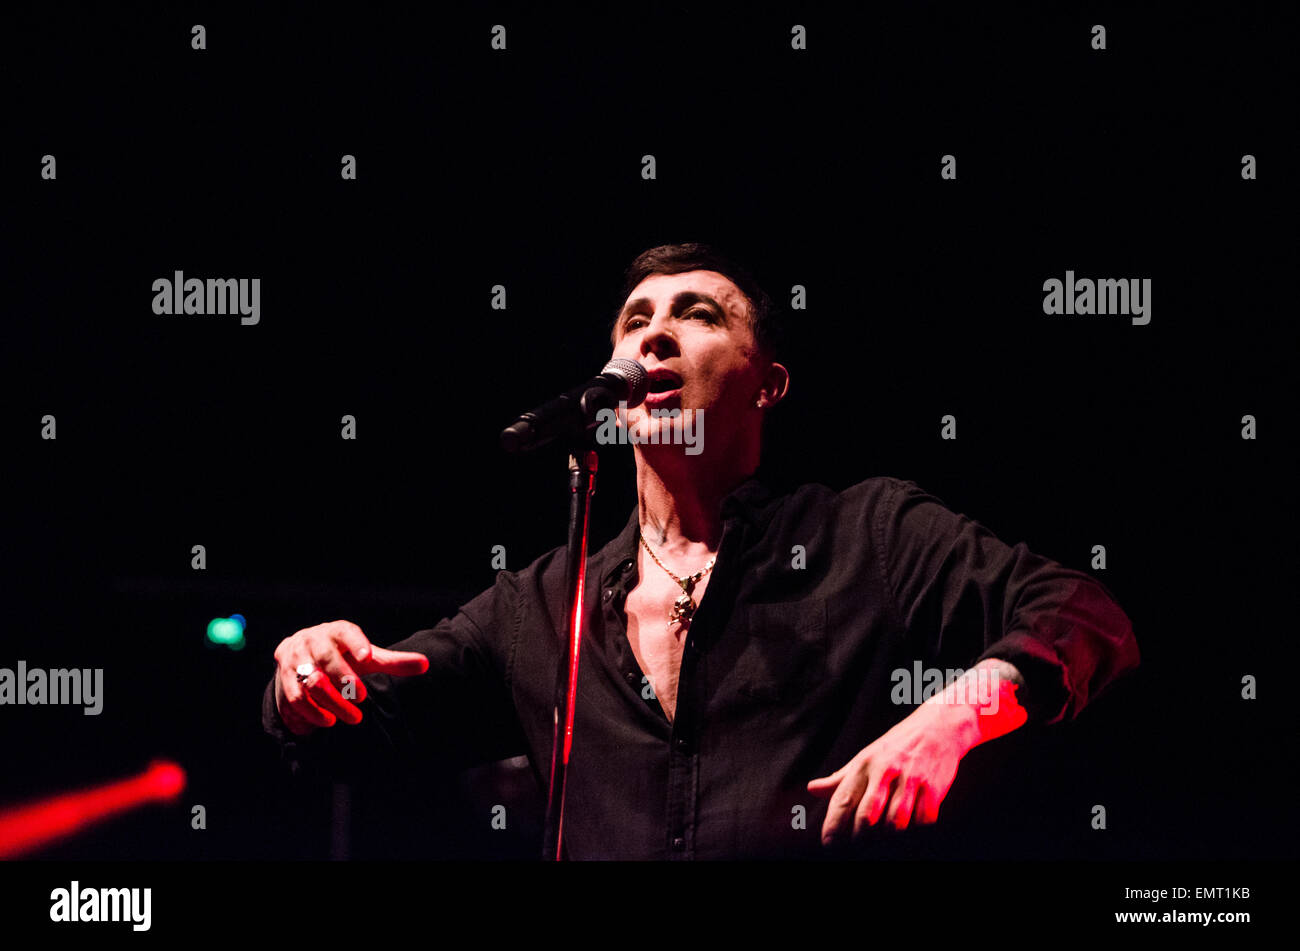 Brighton, UK. 21st Apr, 2015. Marc Almond, English singer-songwriter and musician who began perfoming in the 1980's with synth duo Soft Cell, performs at Brighton Dome Concert Hall on his full UK tour to mark the release of his much awaited new album, The Velvet Trail. Credit:  Francesca Moore/Brighton SOURCE/Alamy Live News Stock Photo